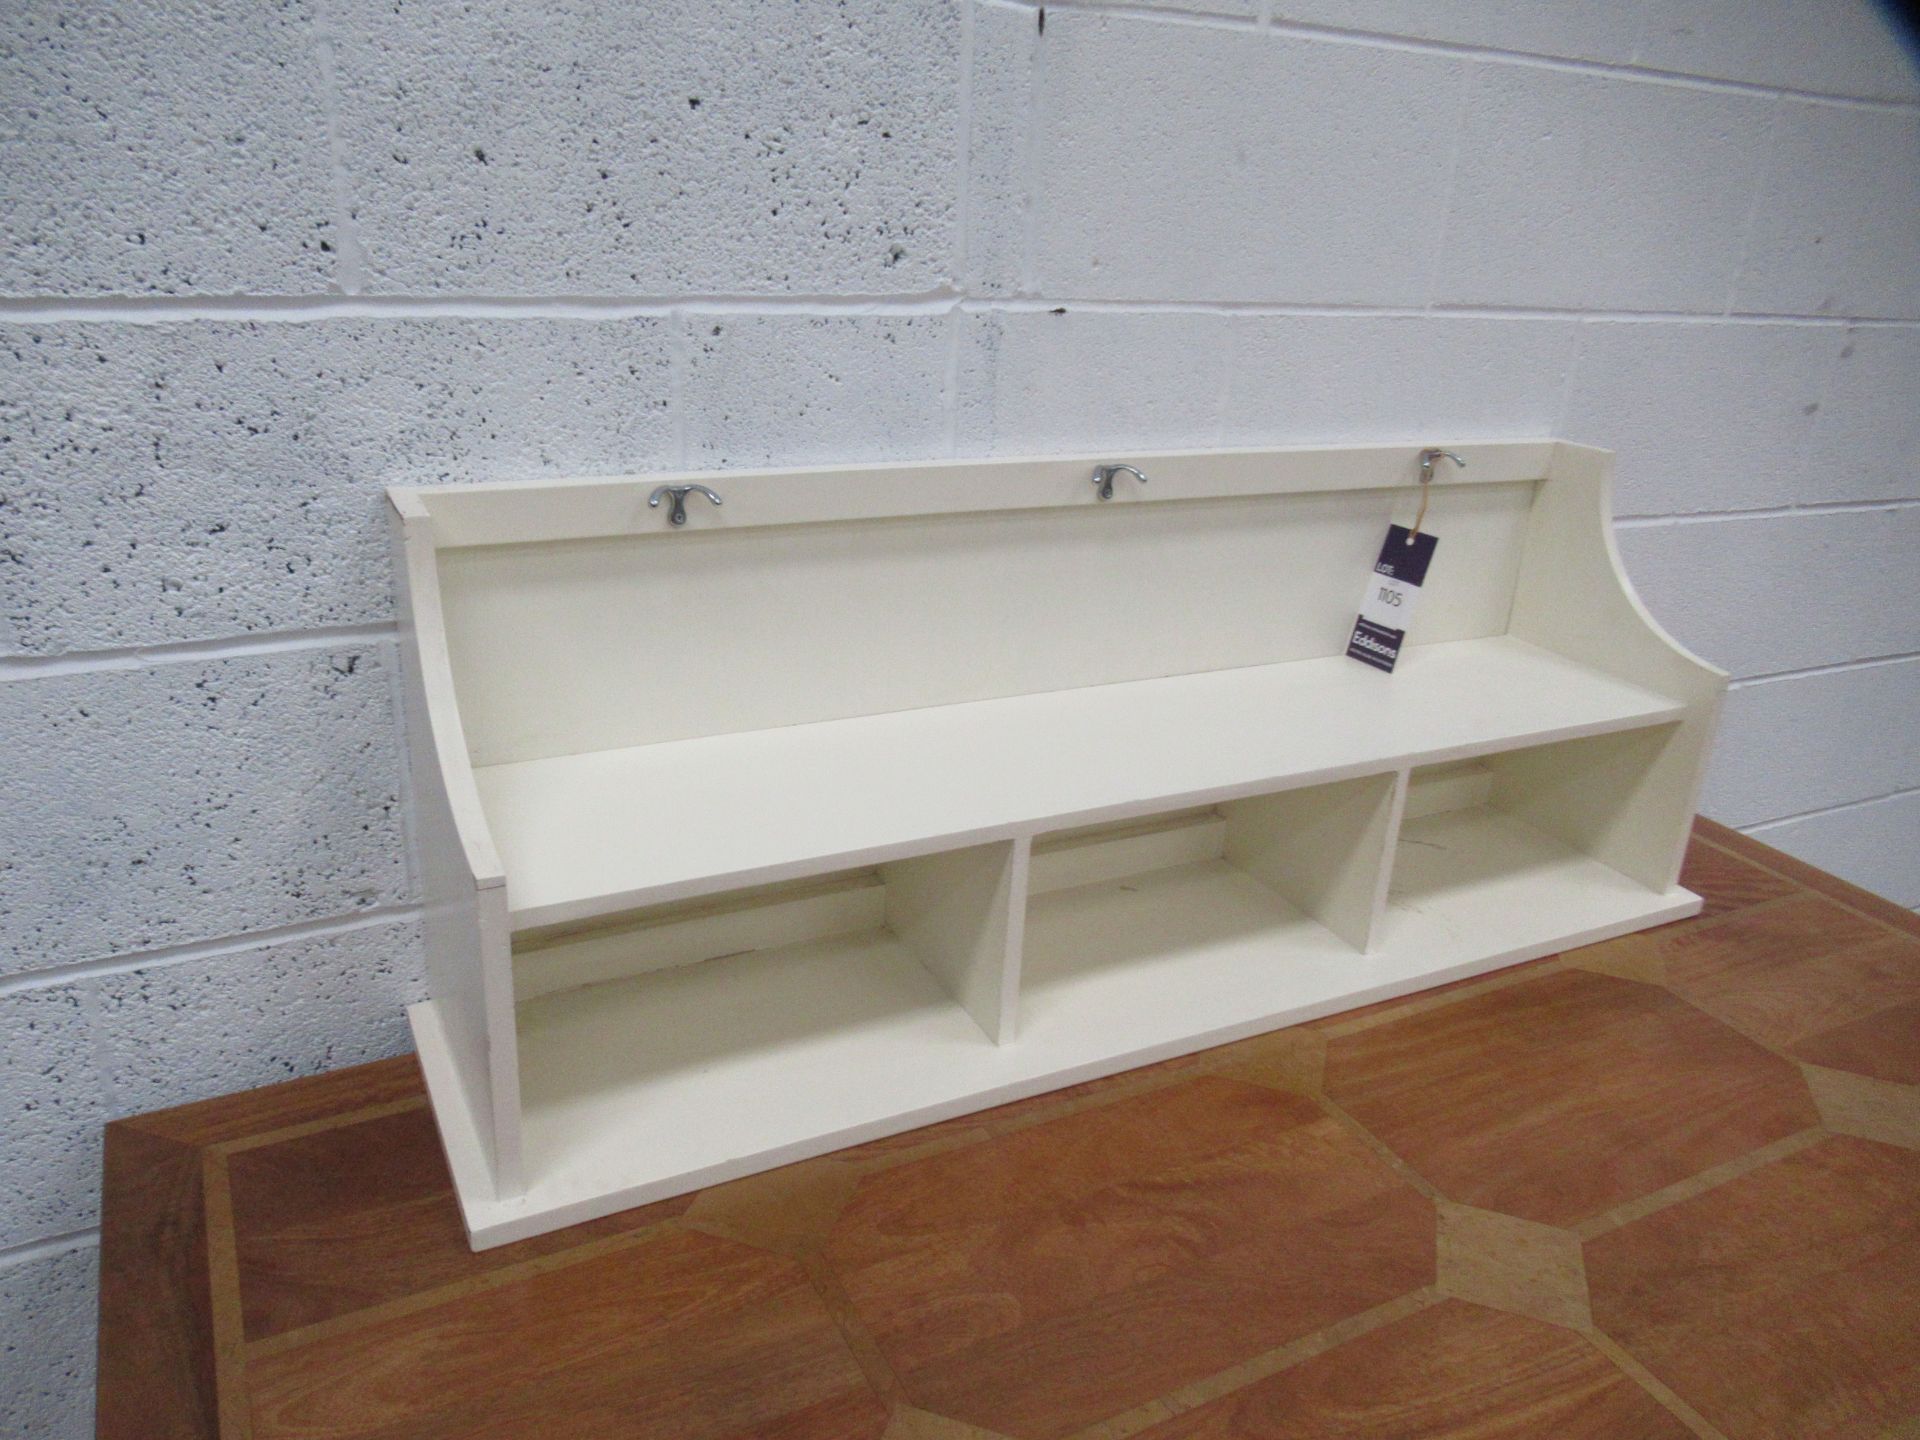 Three Section Painted Mountable Storage Unit with Three Coat Hooks (120cm wide) - Image 2 of 3